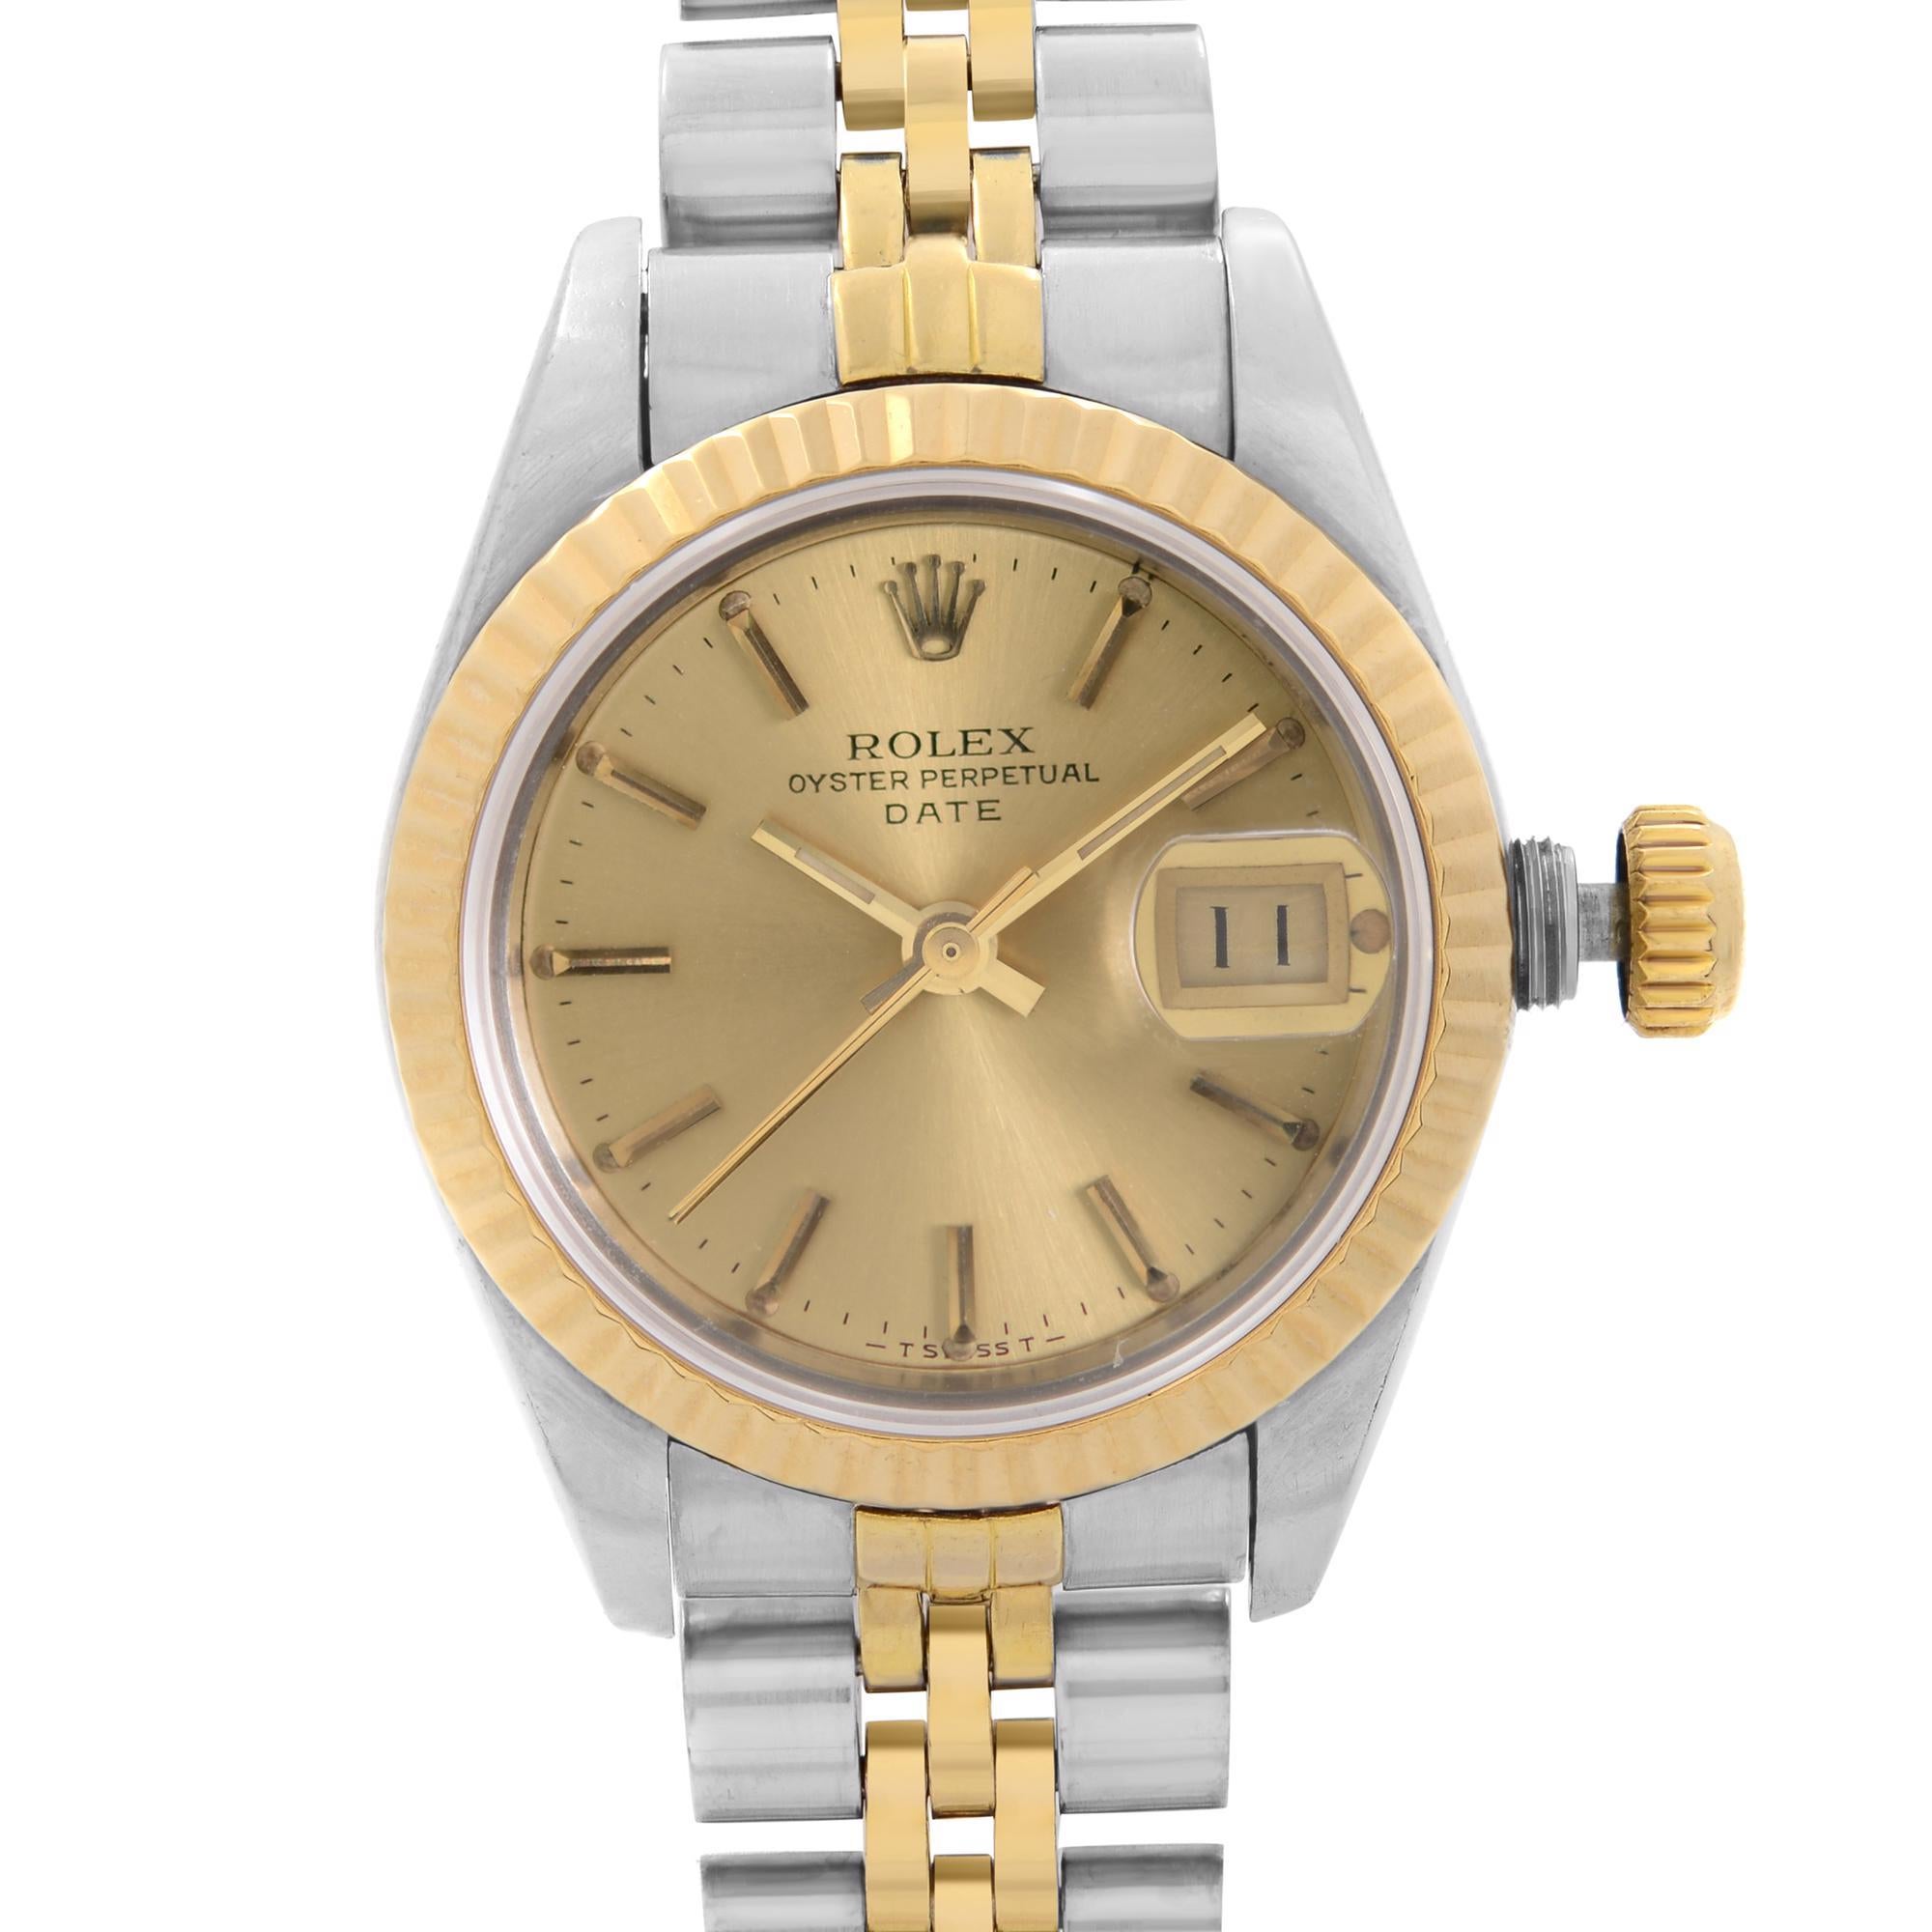 Pre-owned Rolex Datejust Steel 18k Yellow Gold Champagne Dial Automatic Ladies Watch 69173.  Dial have A hairline minor scratch between 1-2 O'Clock only visible under close examination. The band have Moderate slack.  This Beautiful Timepiece was